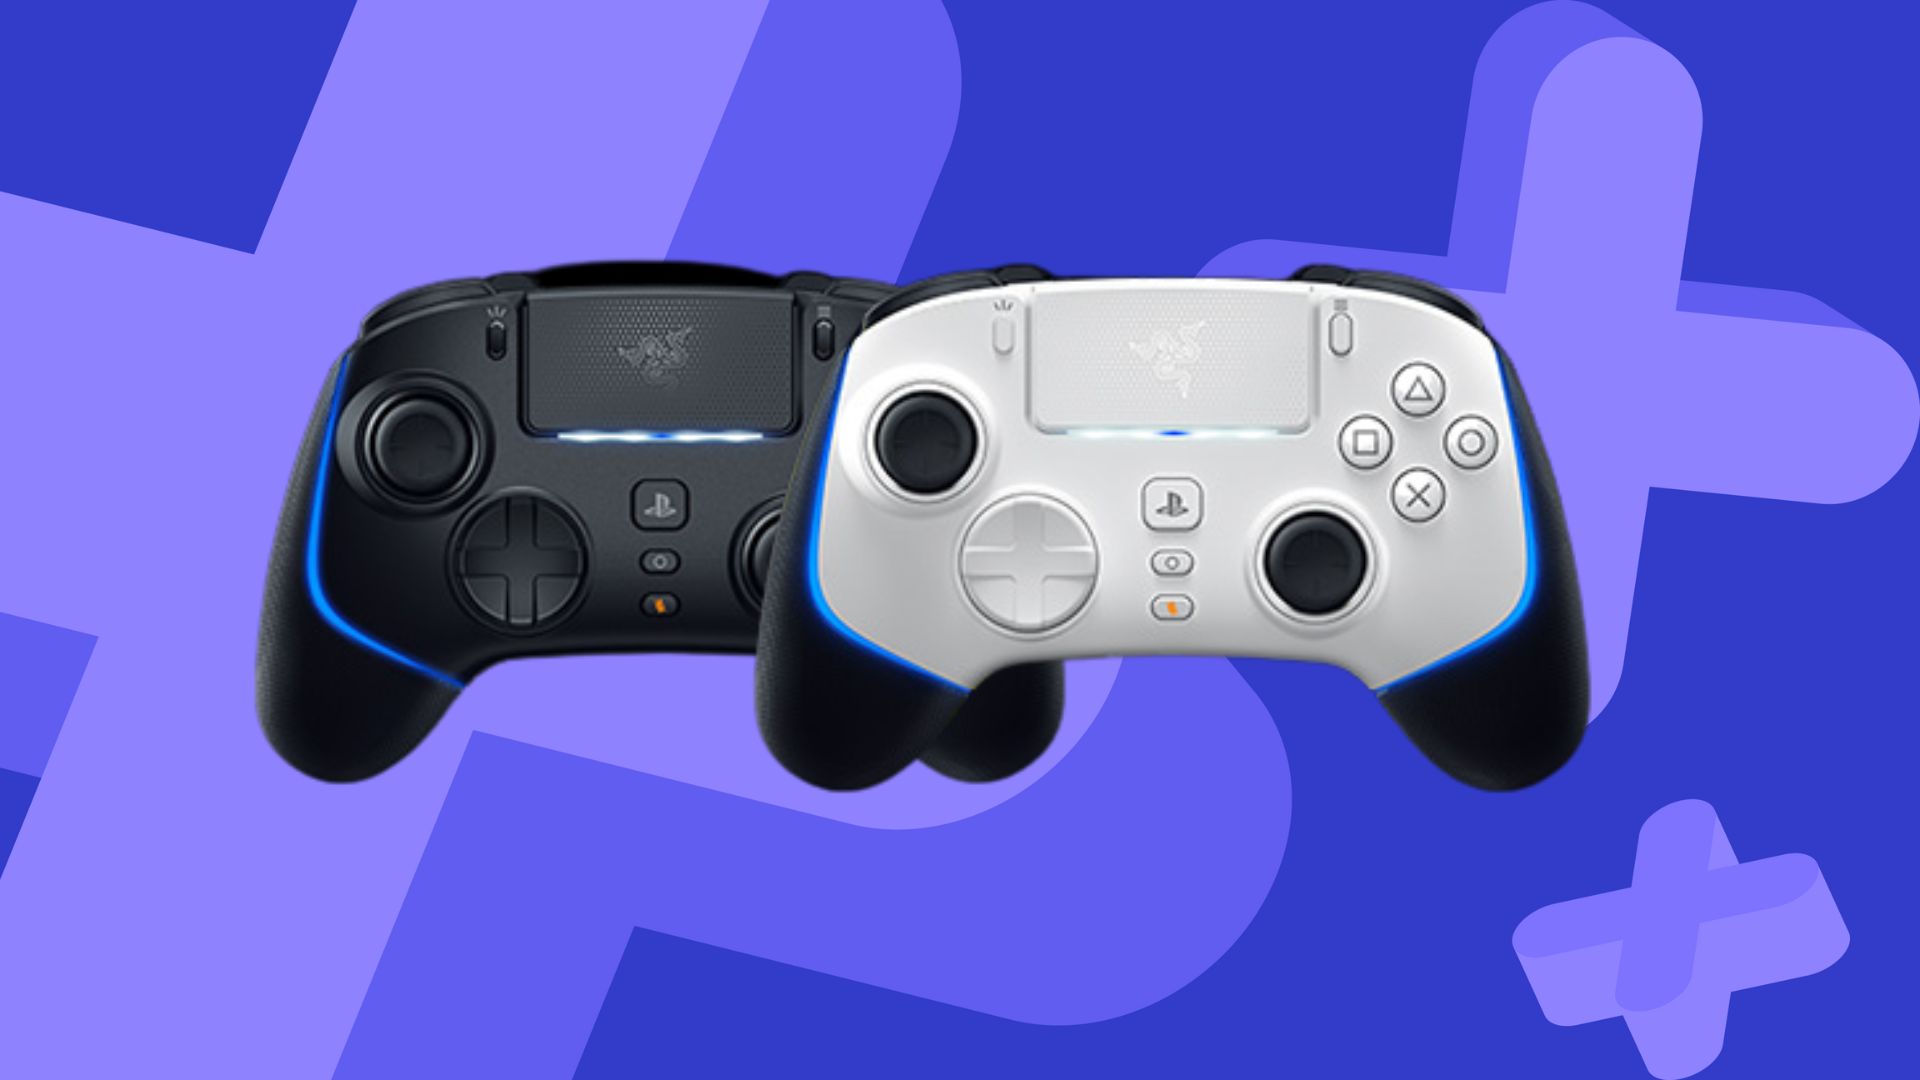 It's time for cheaper third-party PS5 controllers, not more pro